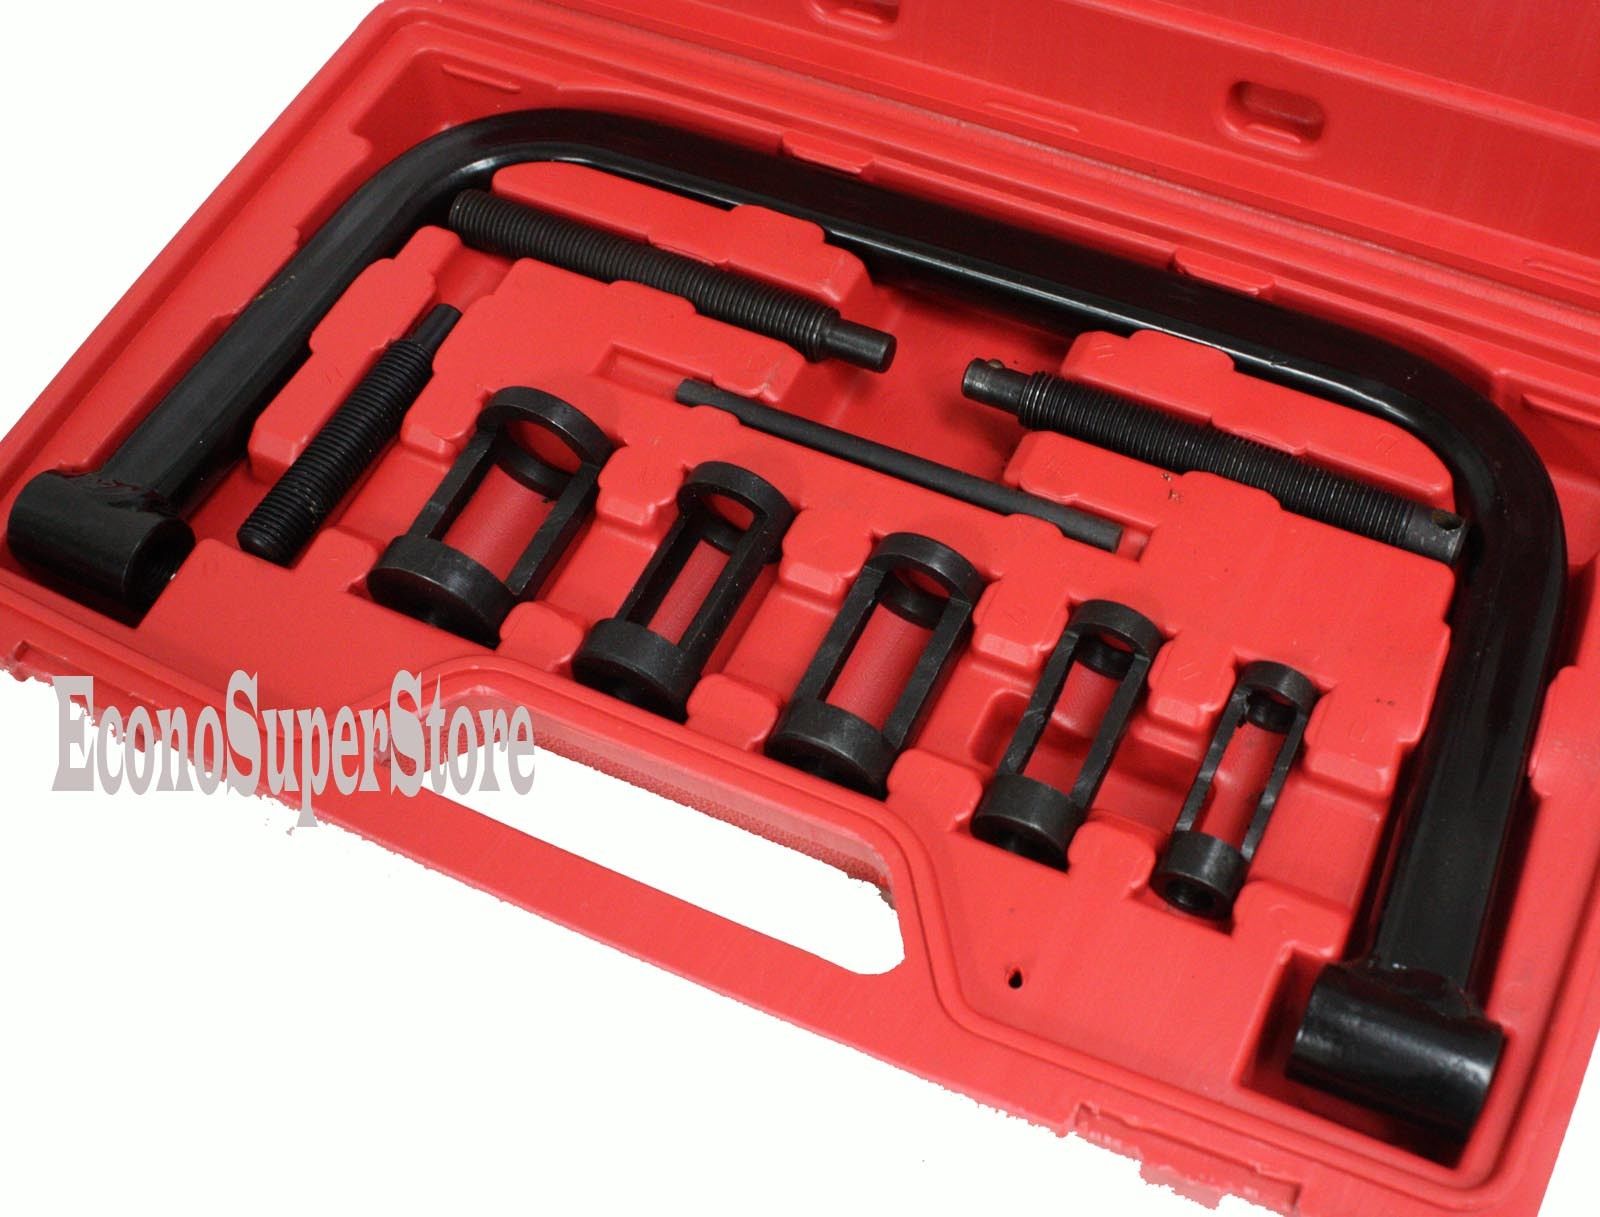 5 Sizes Valve Spring Compressor Pusher Automotive Tool For Car Motorcycle Kit 